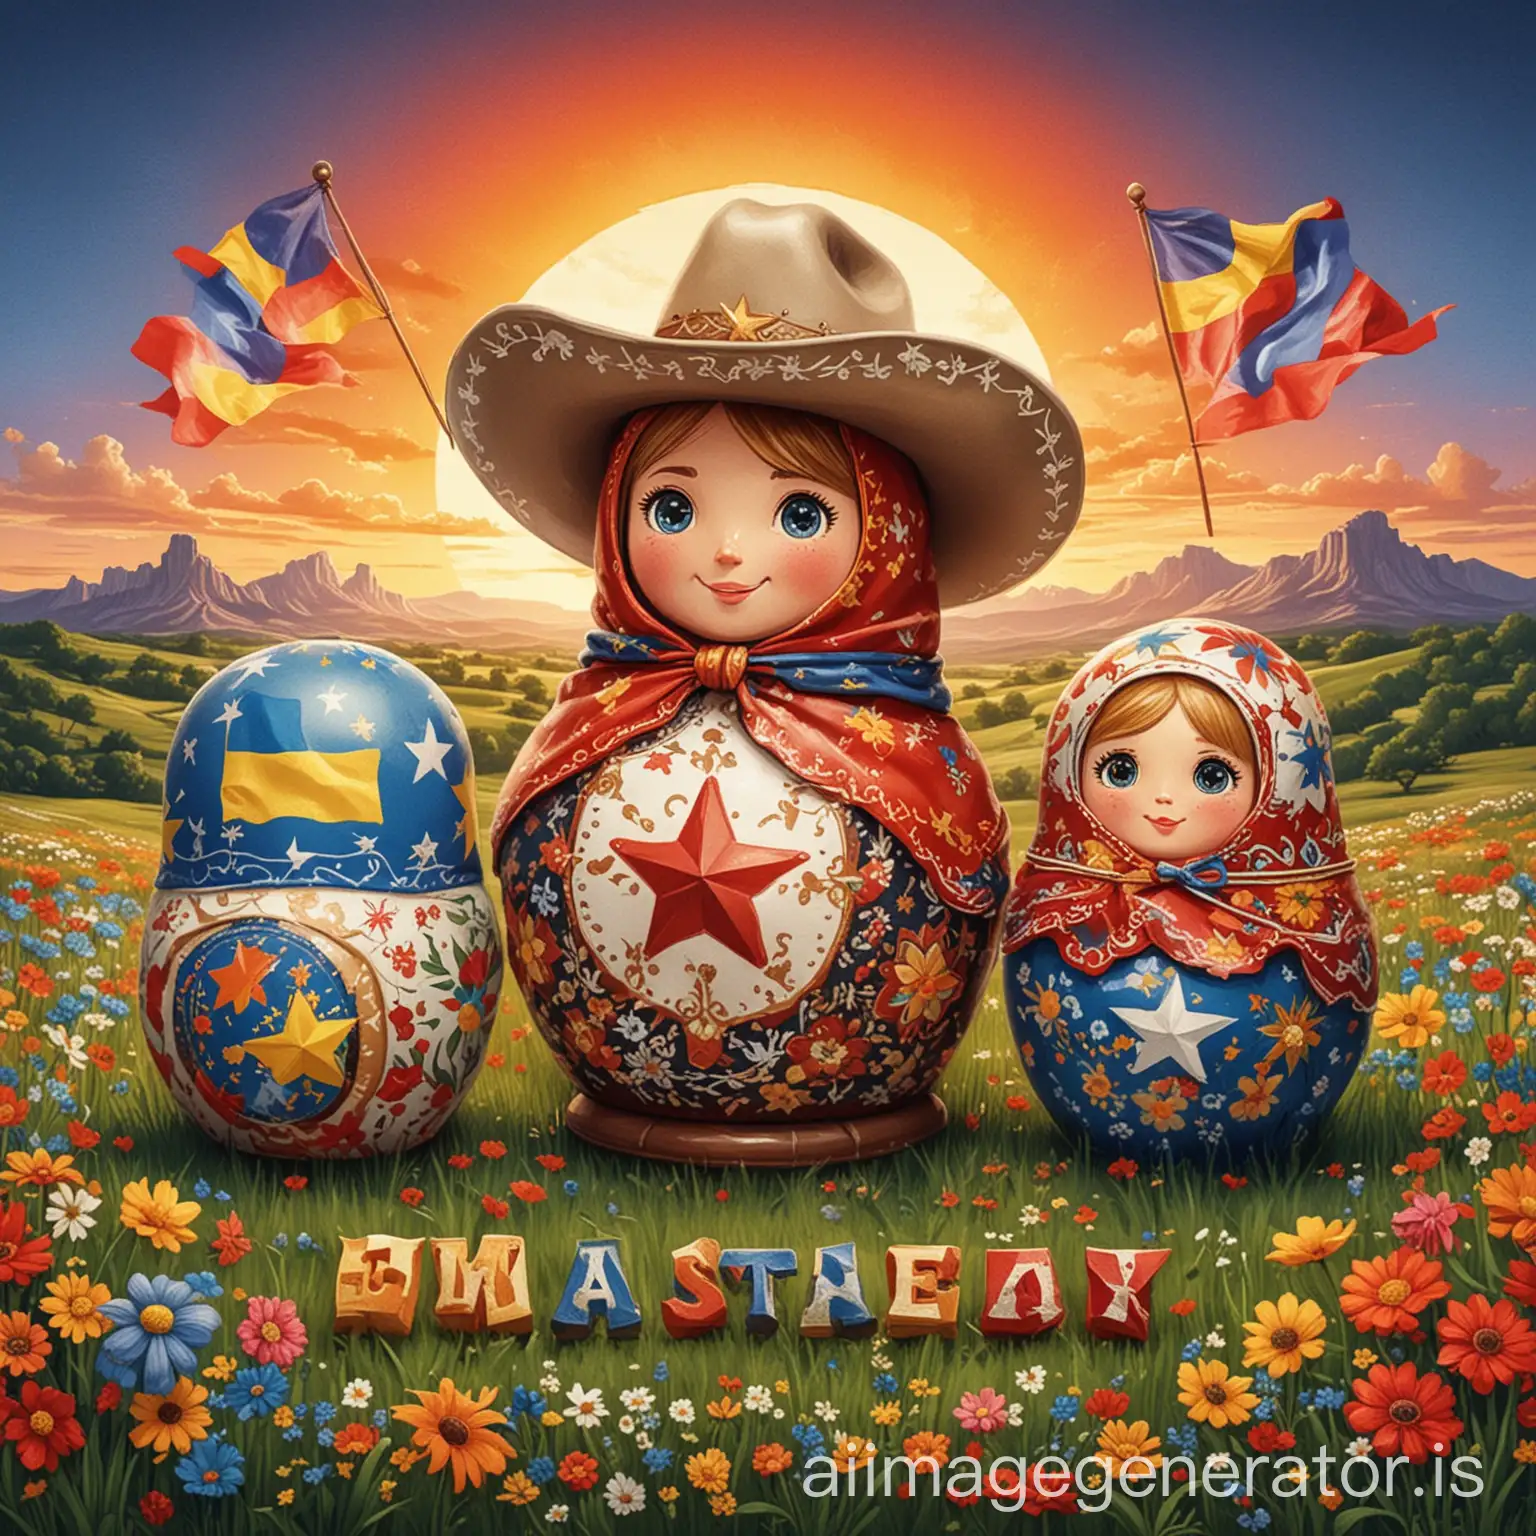 Create a cartoon-style image for a Facebook group that welcomes Europeans, Russians, and Ukrainians living in Central Texas. The image should include:1. The flags of Europe, Russia, and Ukraine, depicted in a fun, cartoon style.2. Iconic cultural elements like a cartoon Matryoshka doll, whimsical Ukrainian embroidery, and playful renditions of famous  embroidery 3. Symbols of Texas, such as a cartoon Texas star, cowboy hats, and a cute, cartoonish silhouette of the Texas state.4. A vibrant, colorful background featuring a cartoon-style Central Texas landscape, such as a sunset over rolling hills or a city skyline with exaggerated, playful details.5. Warm, inviting text in a bubbly, cartoon font that reads: 'Central Texas European & Eastern European Community Group. Celebrate cultures, share traditions, and build friendships.'